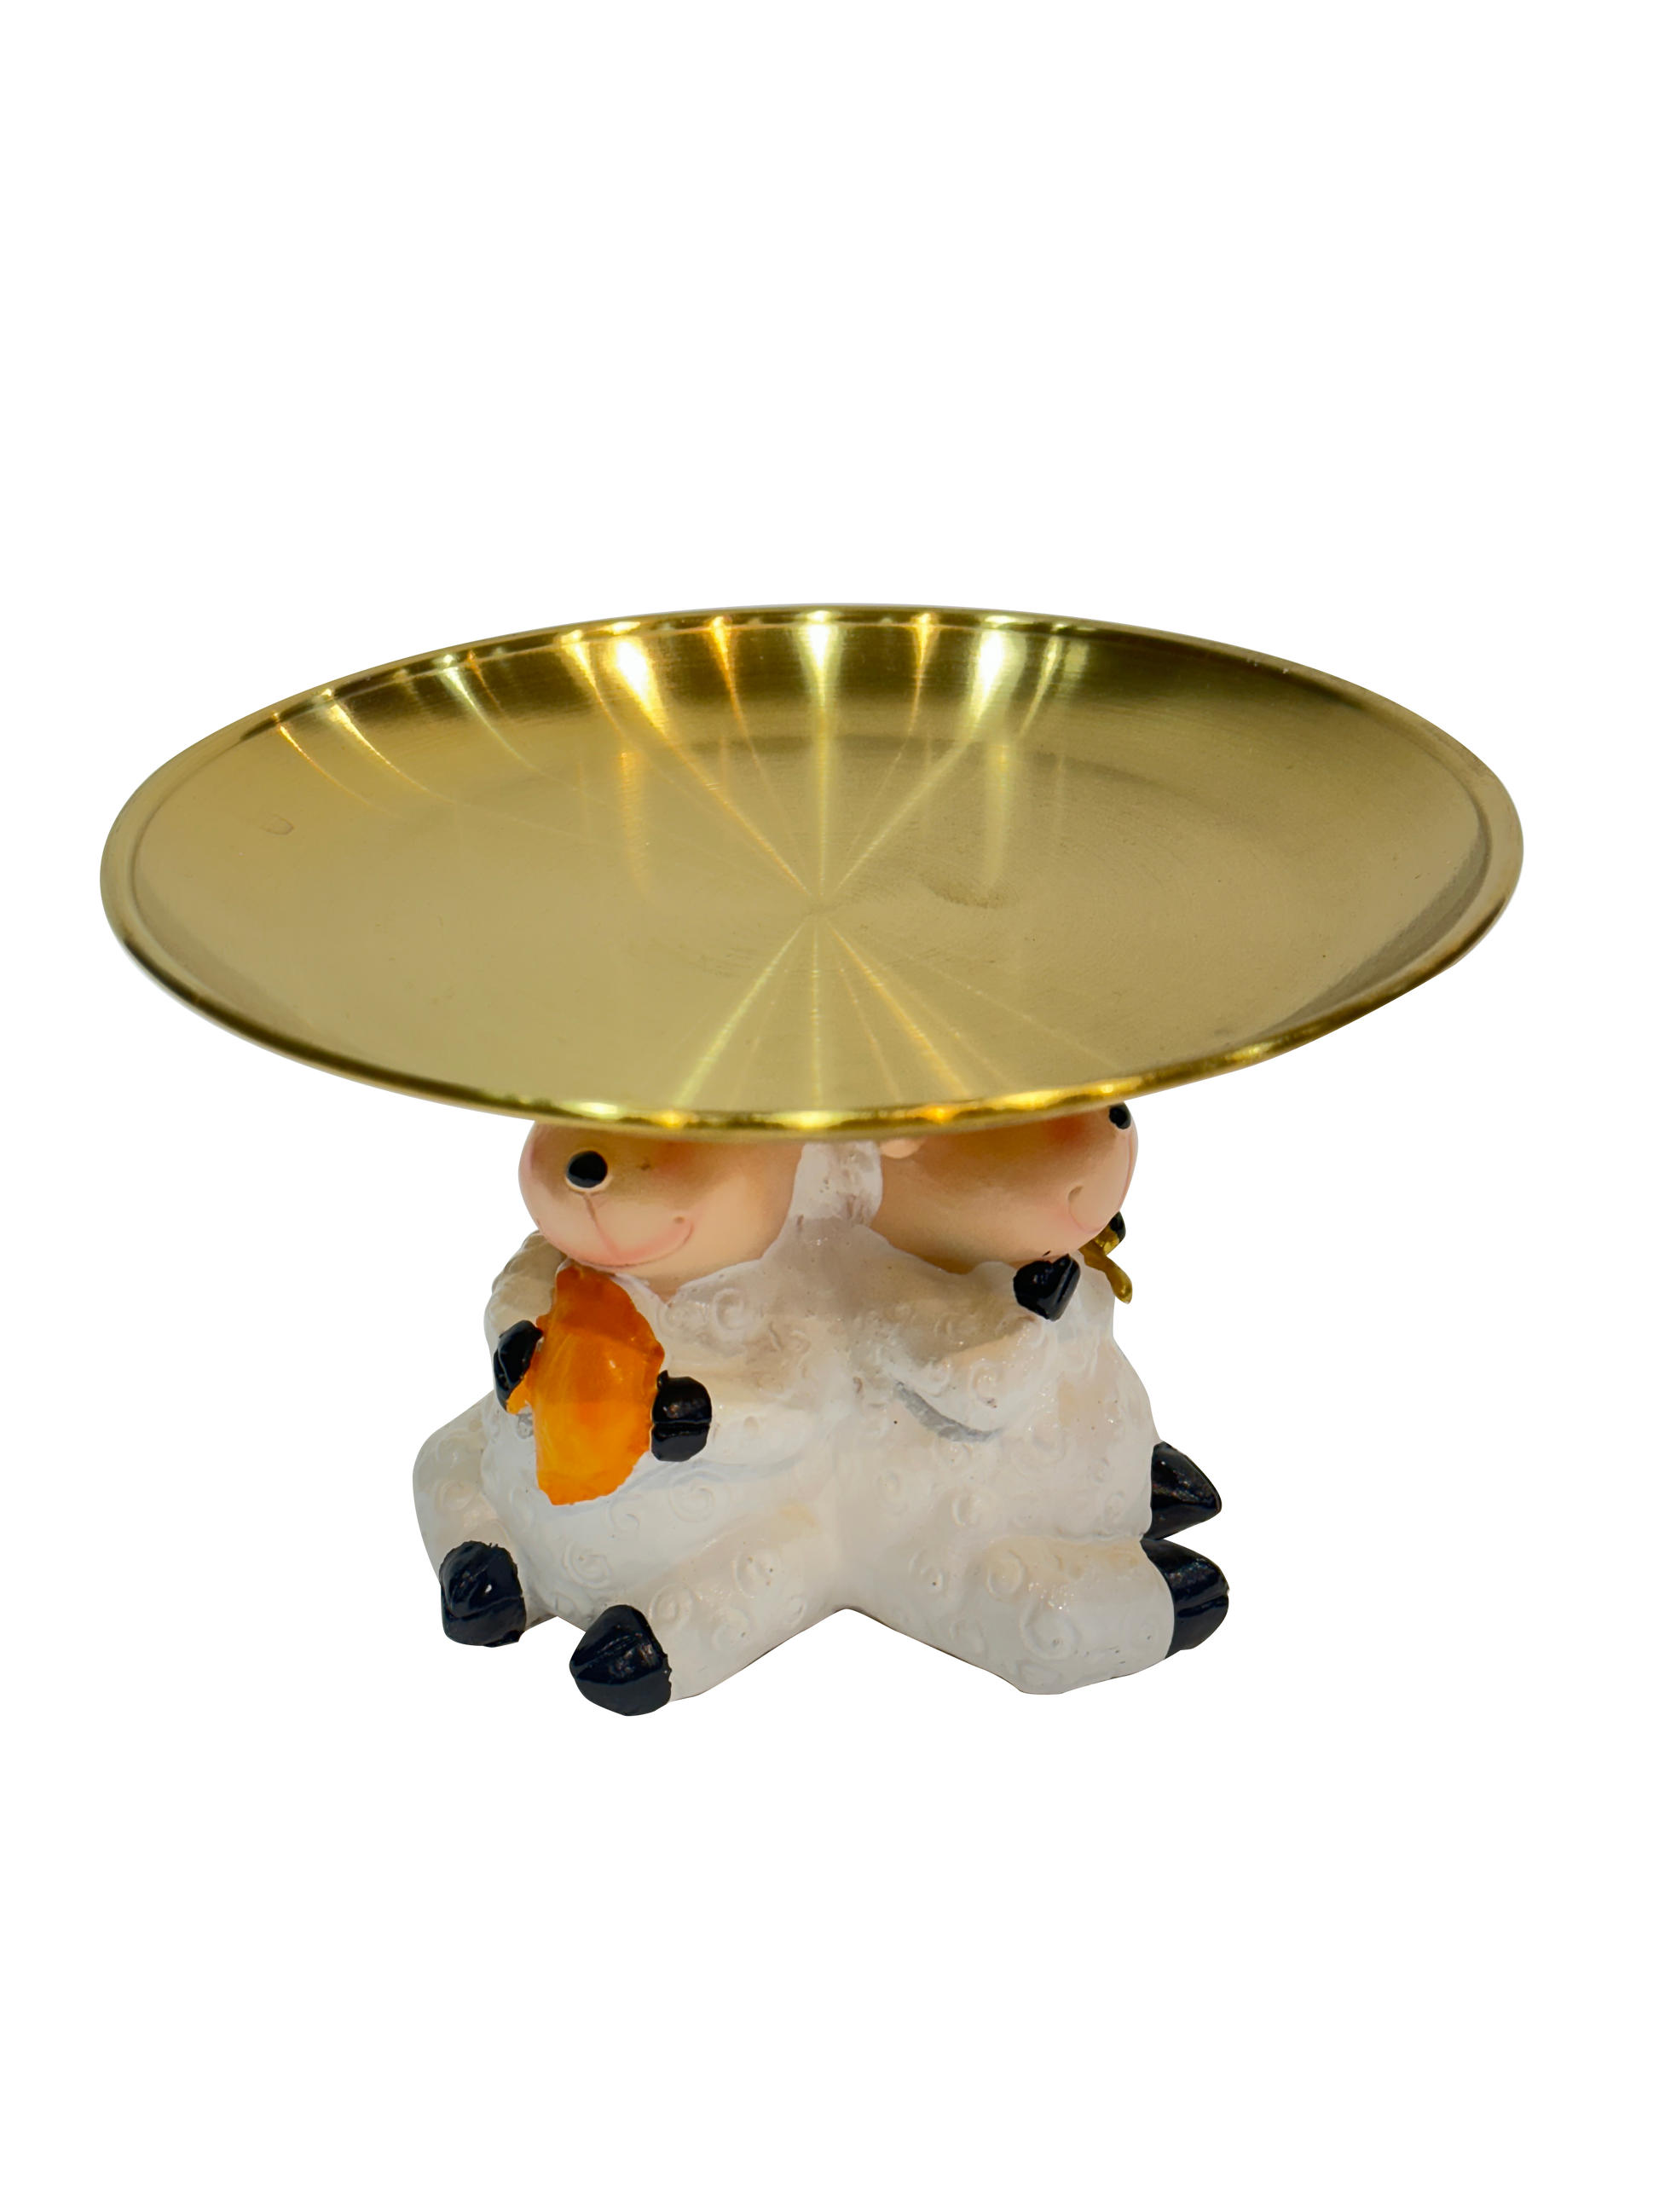 Artifcial Sheep With Rounded Golden Plate - Sunset Gifts Store